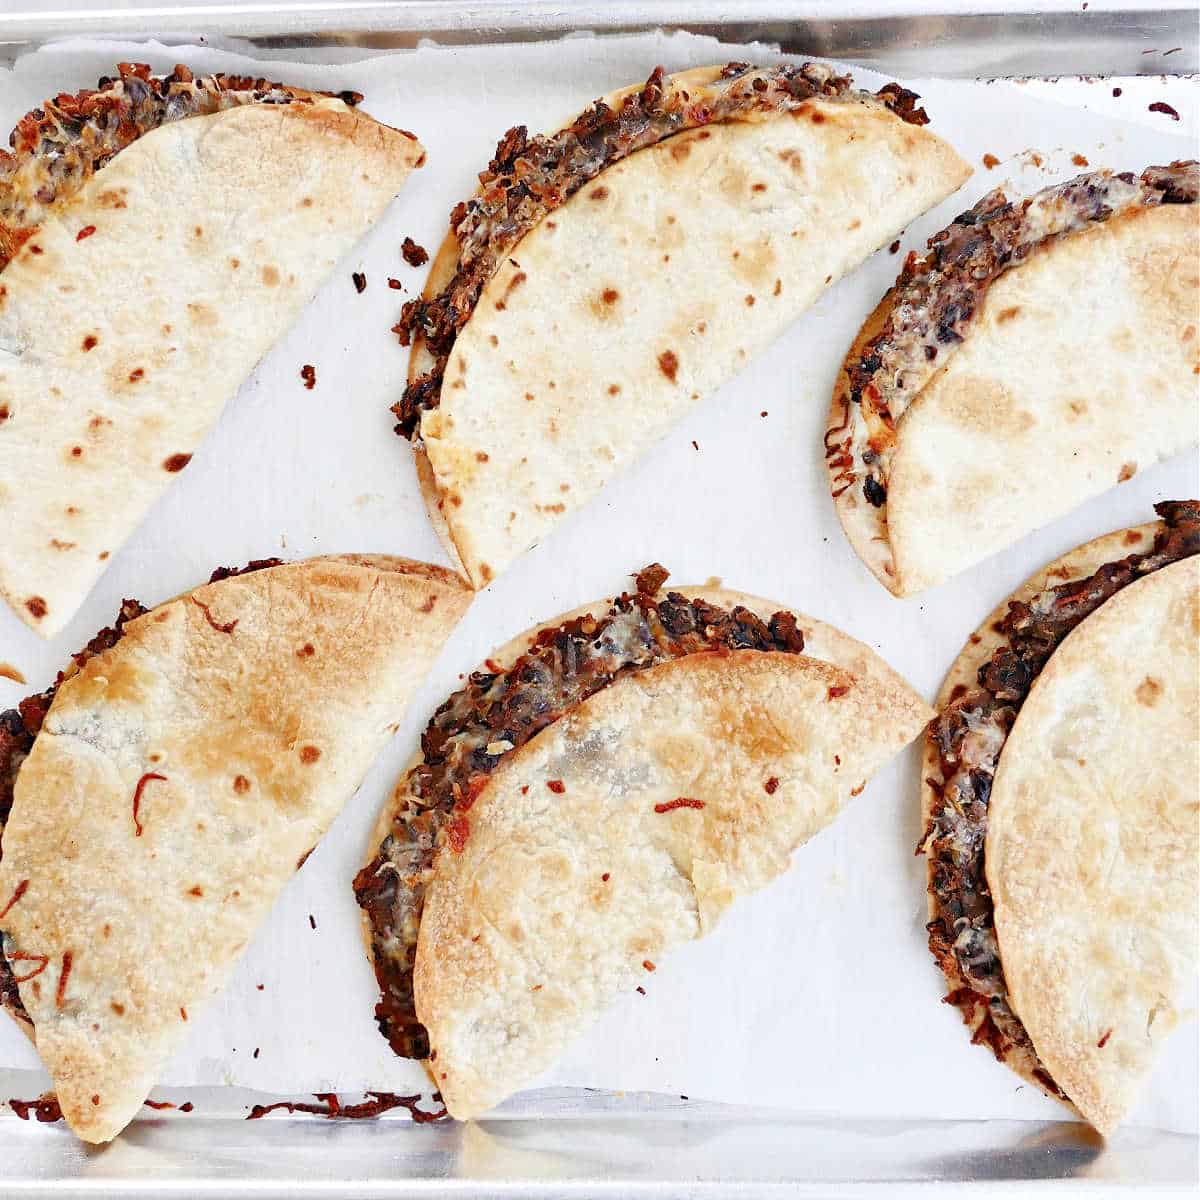 crispy black bean tacos on a lined baking sheet after cooking